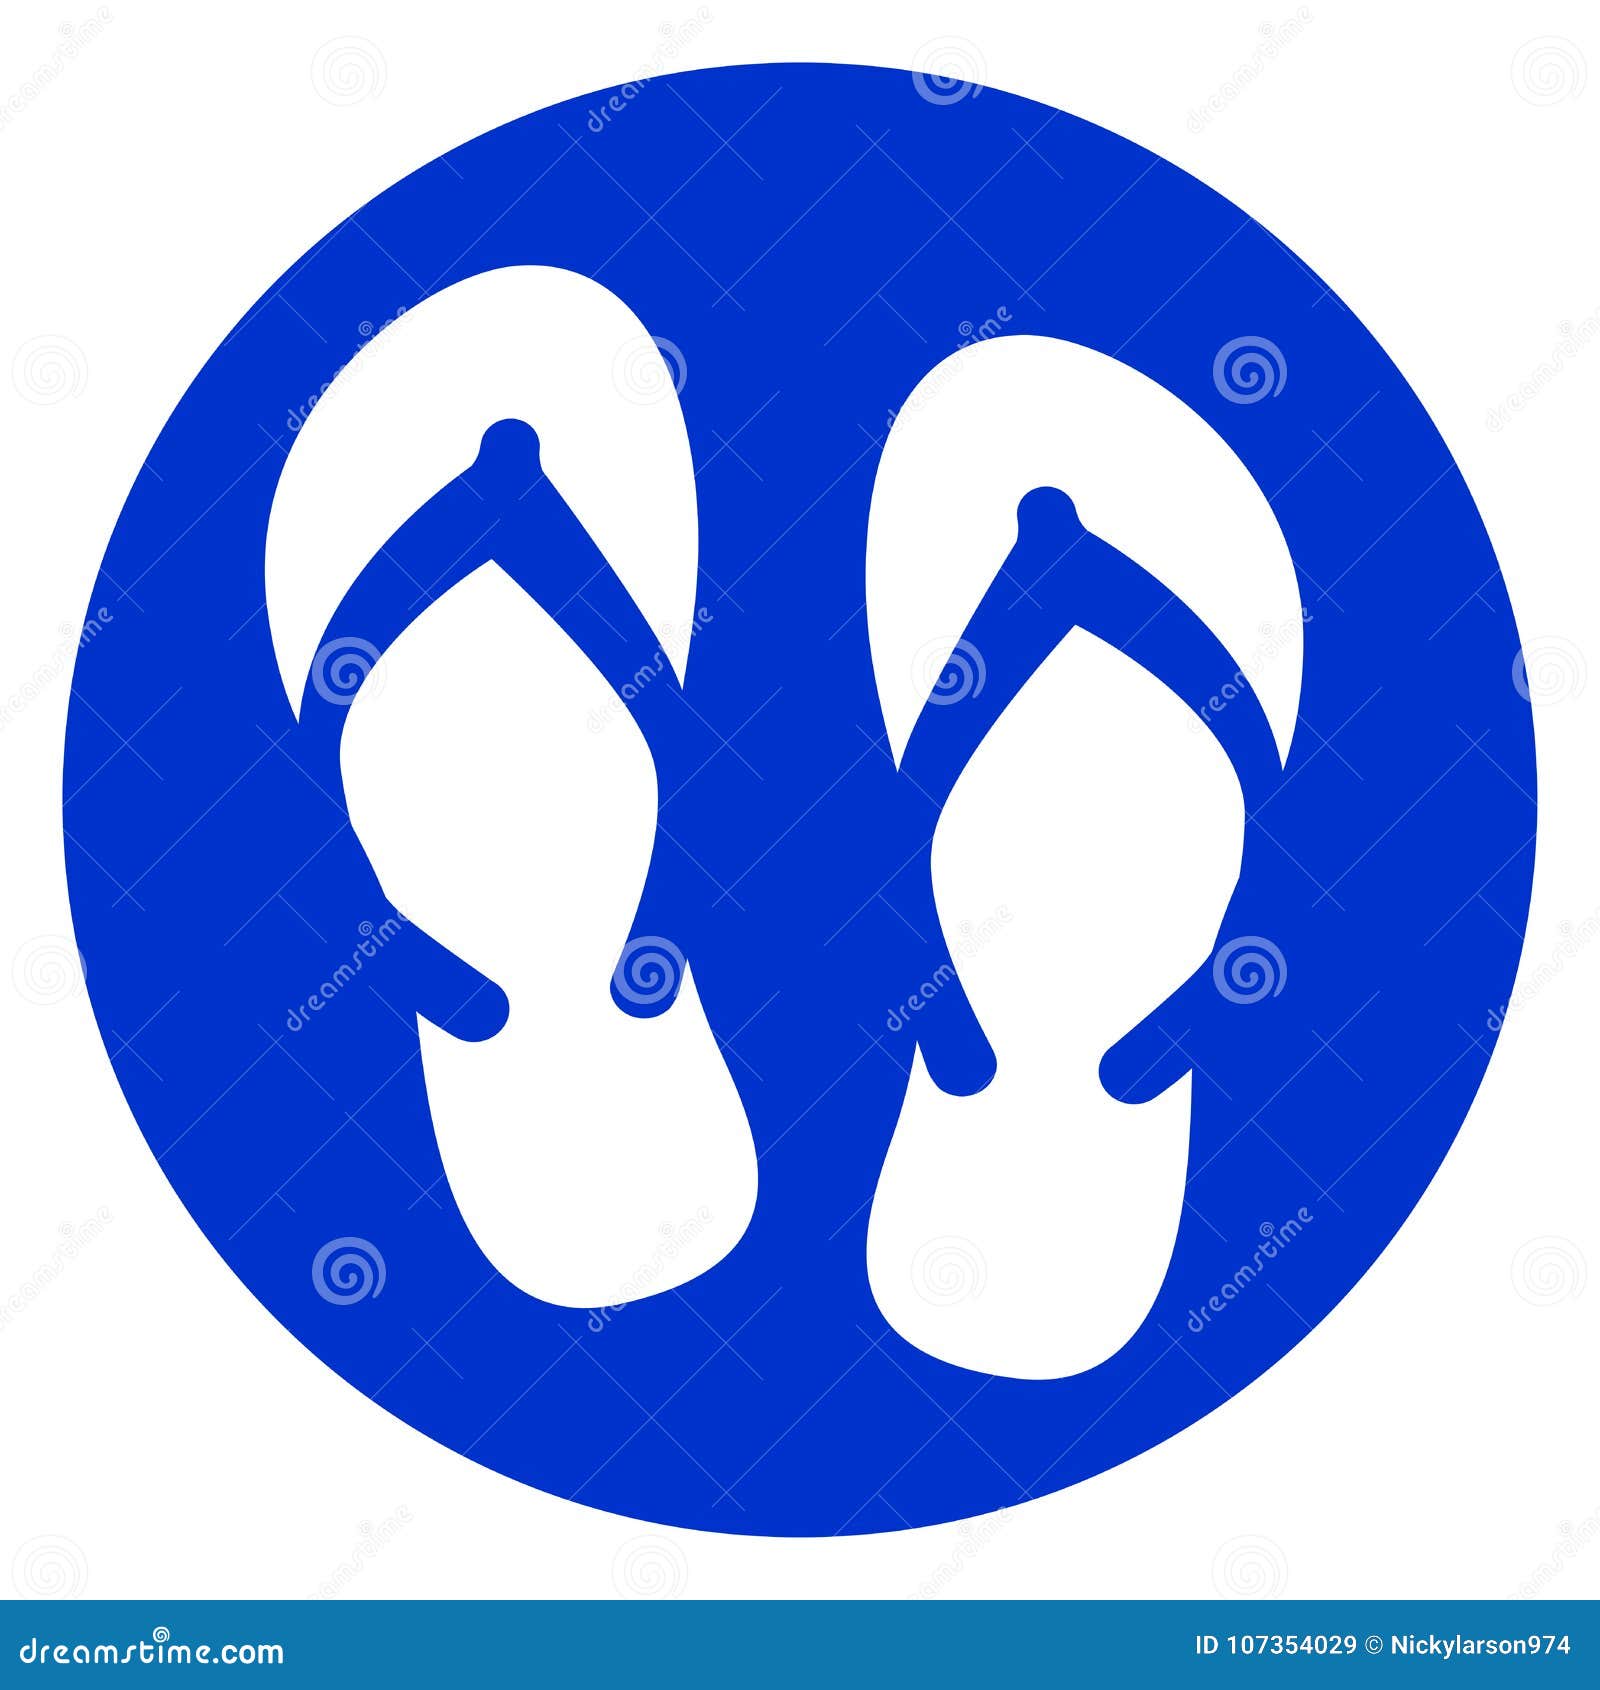 Flip flop blue circle icon stock vector. Illustration of holiday ...